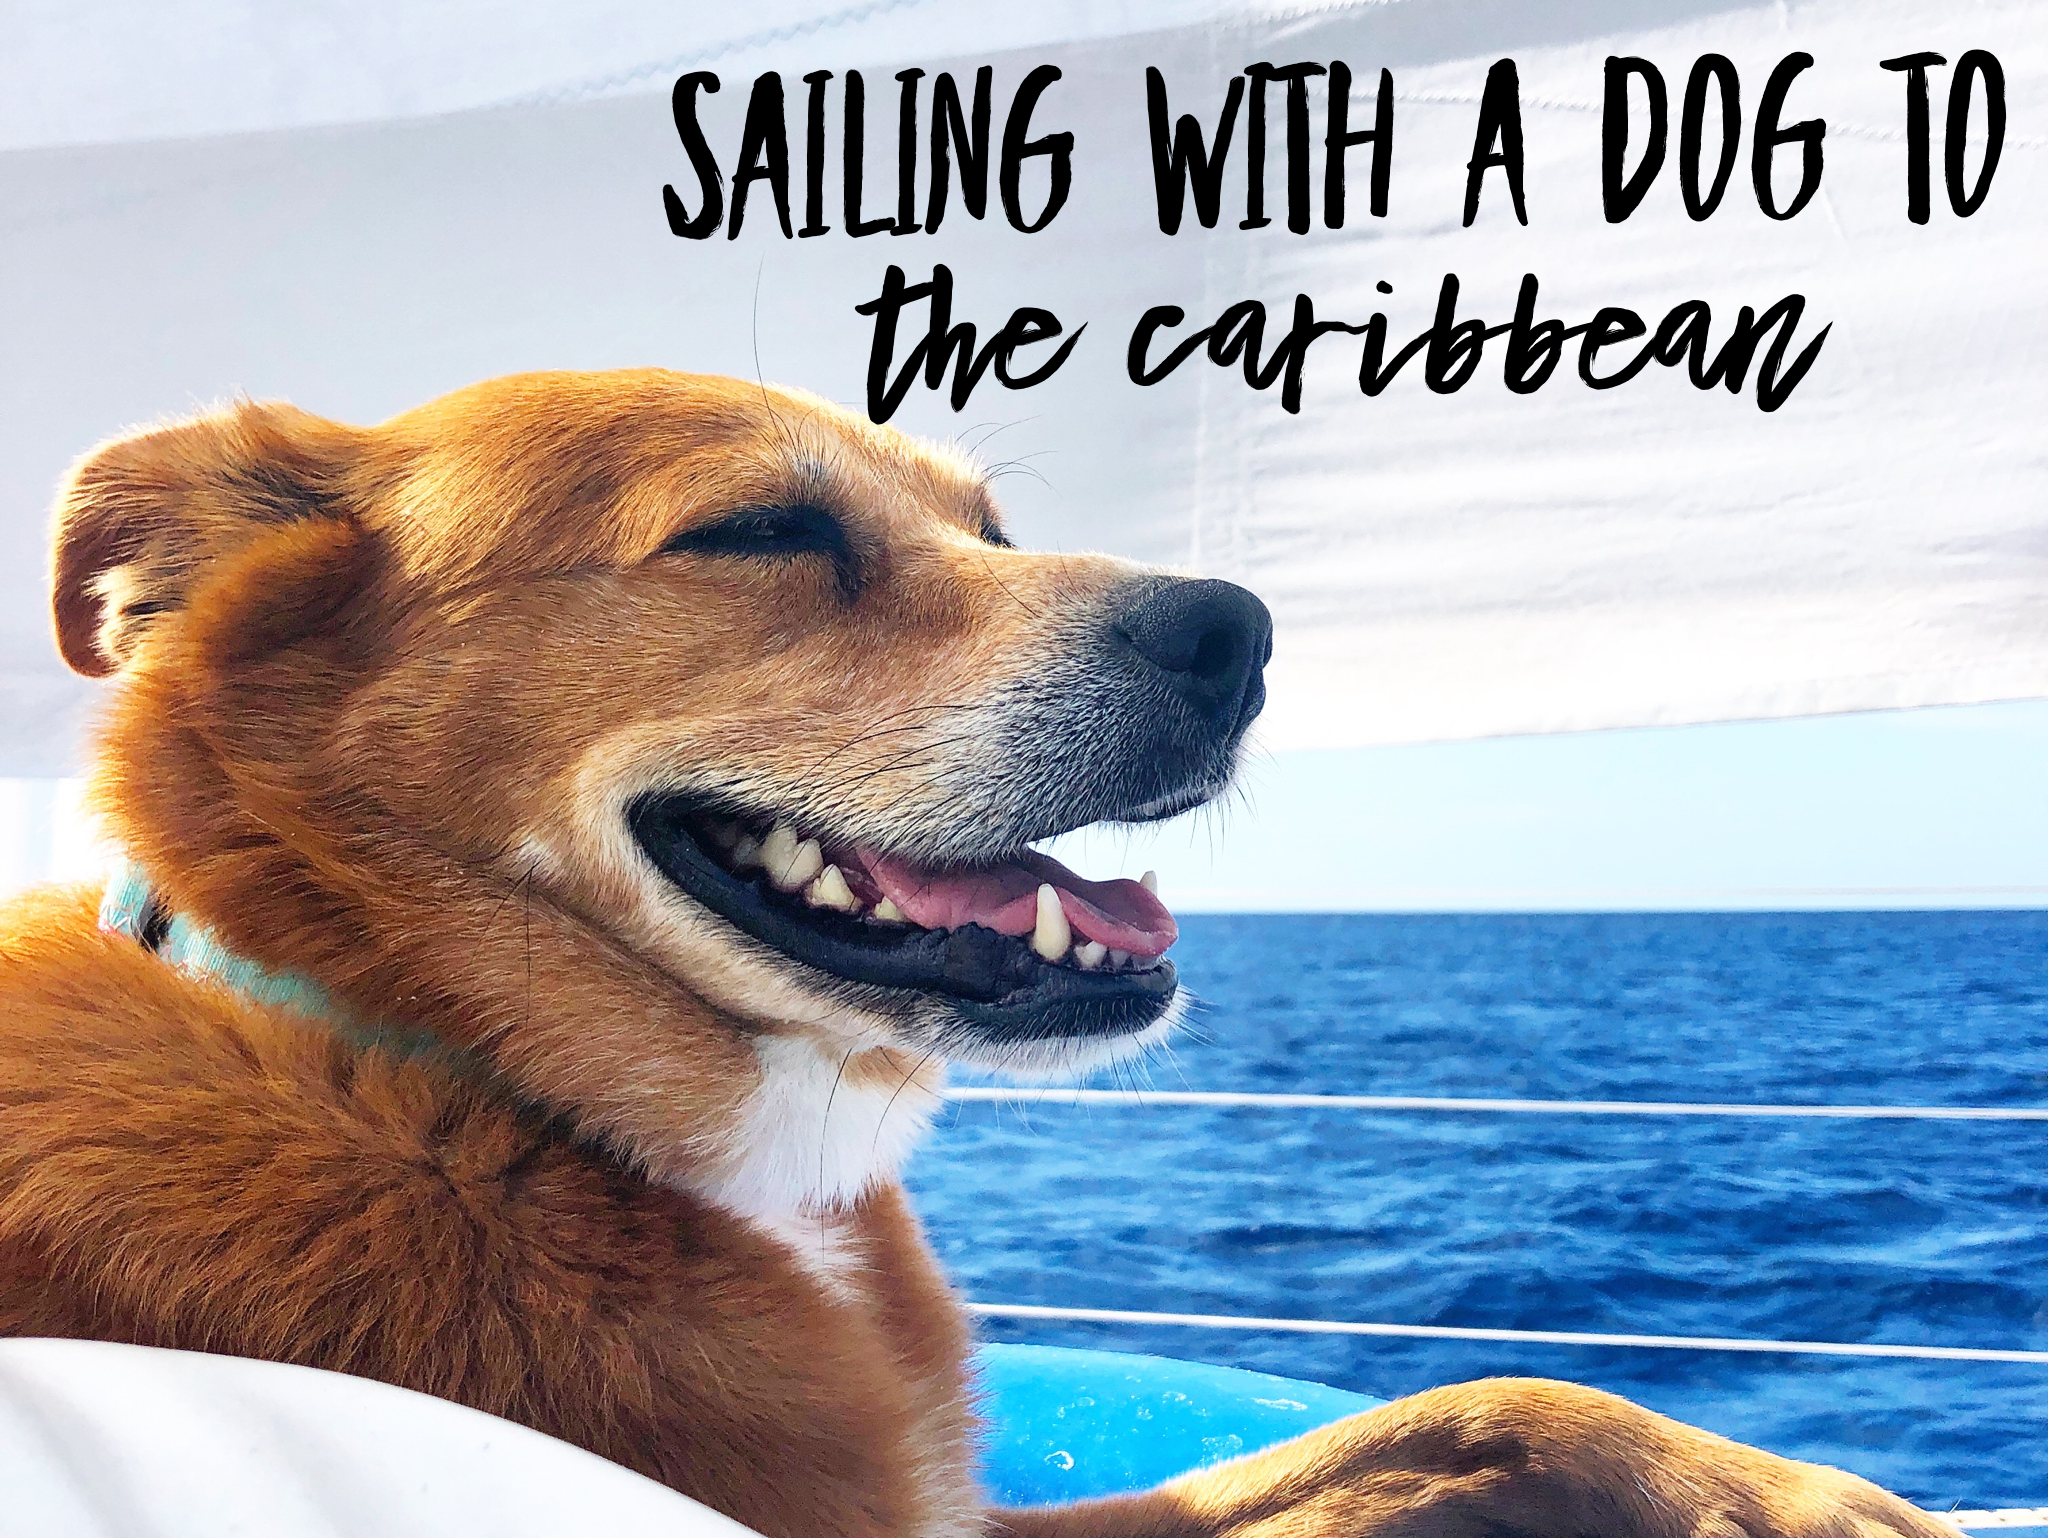 Sailing with a dog to the Caribbean